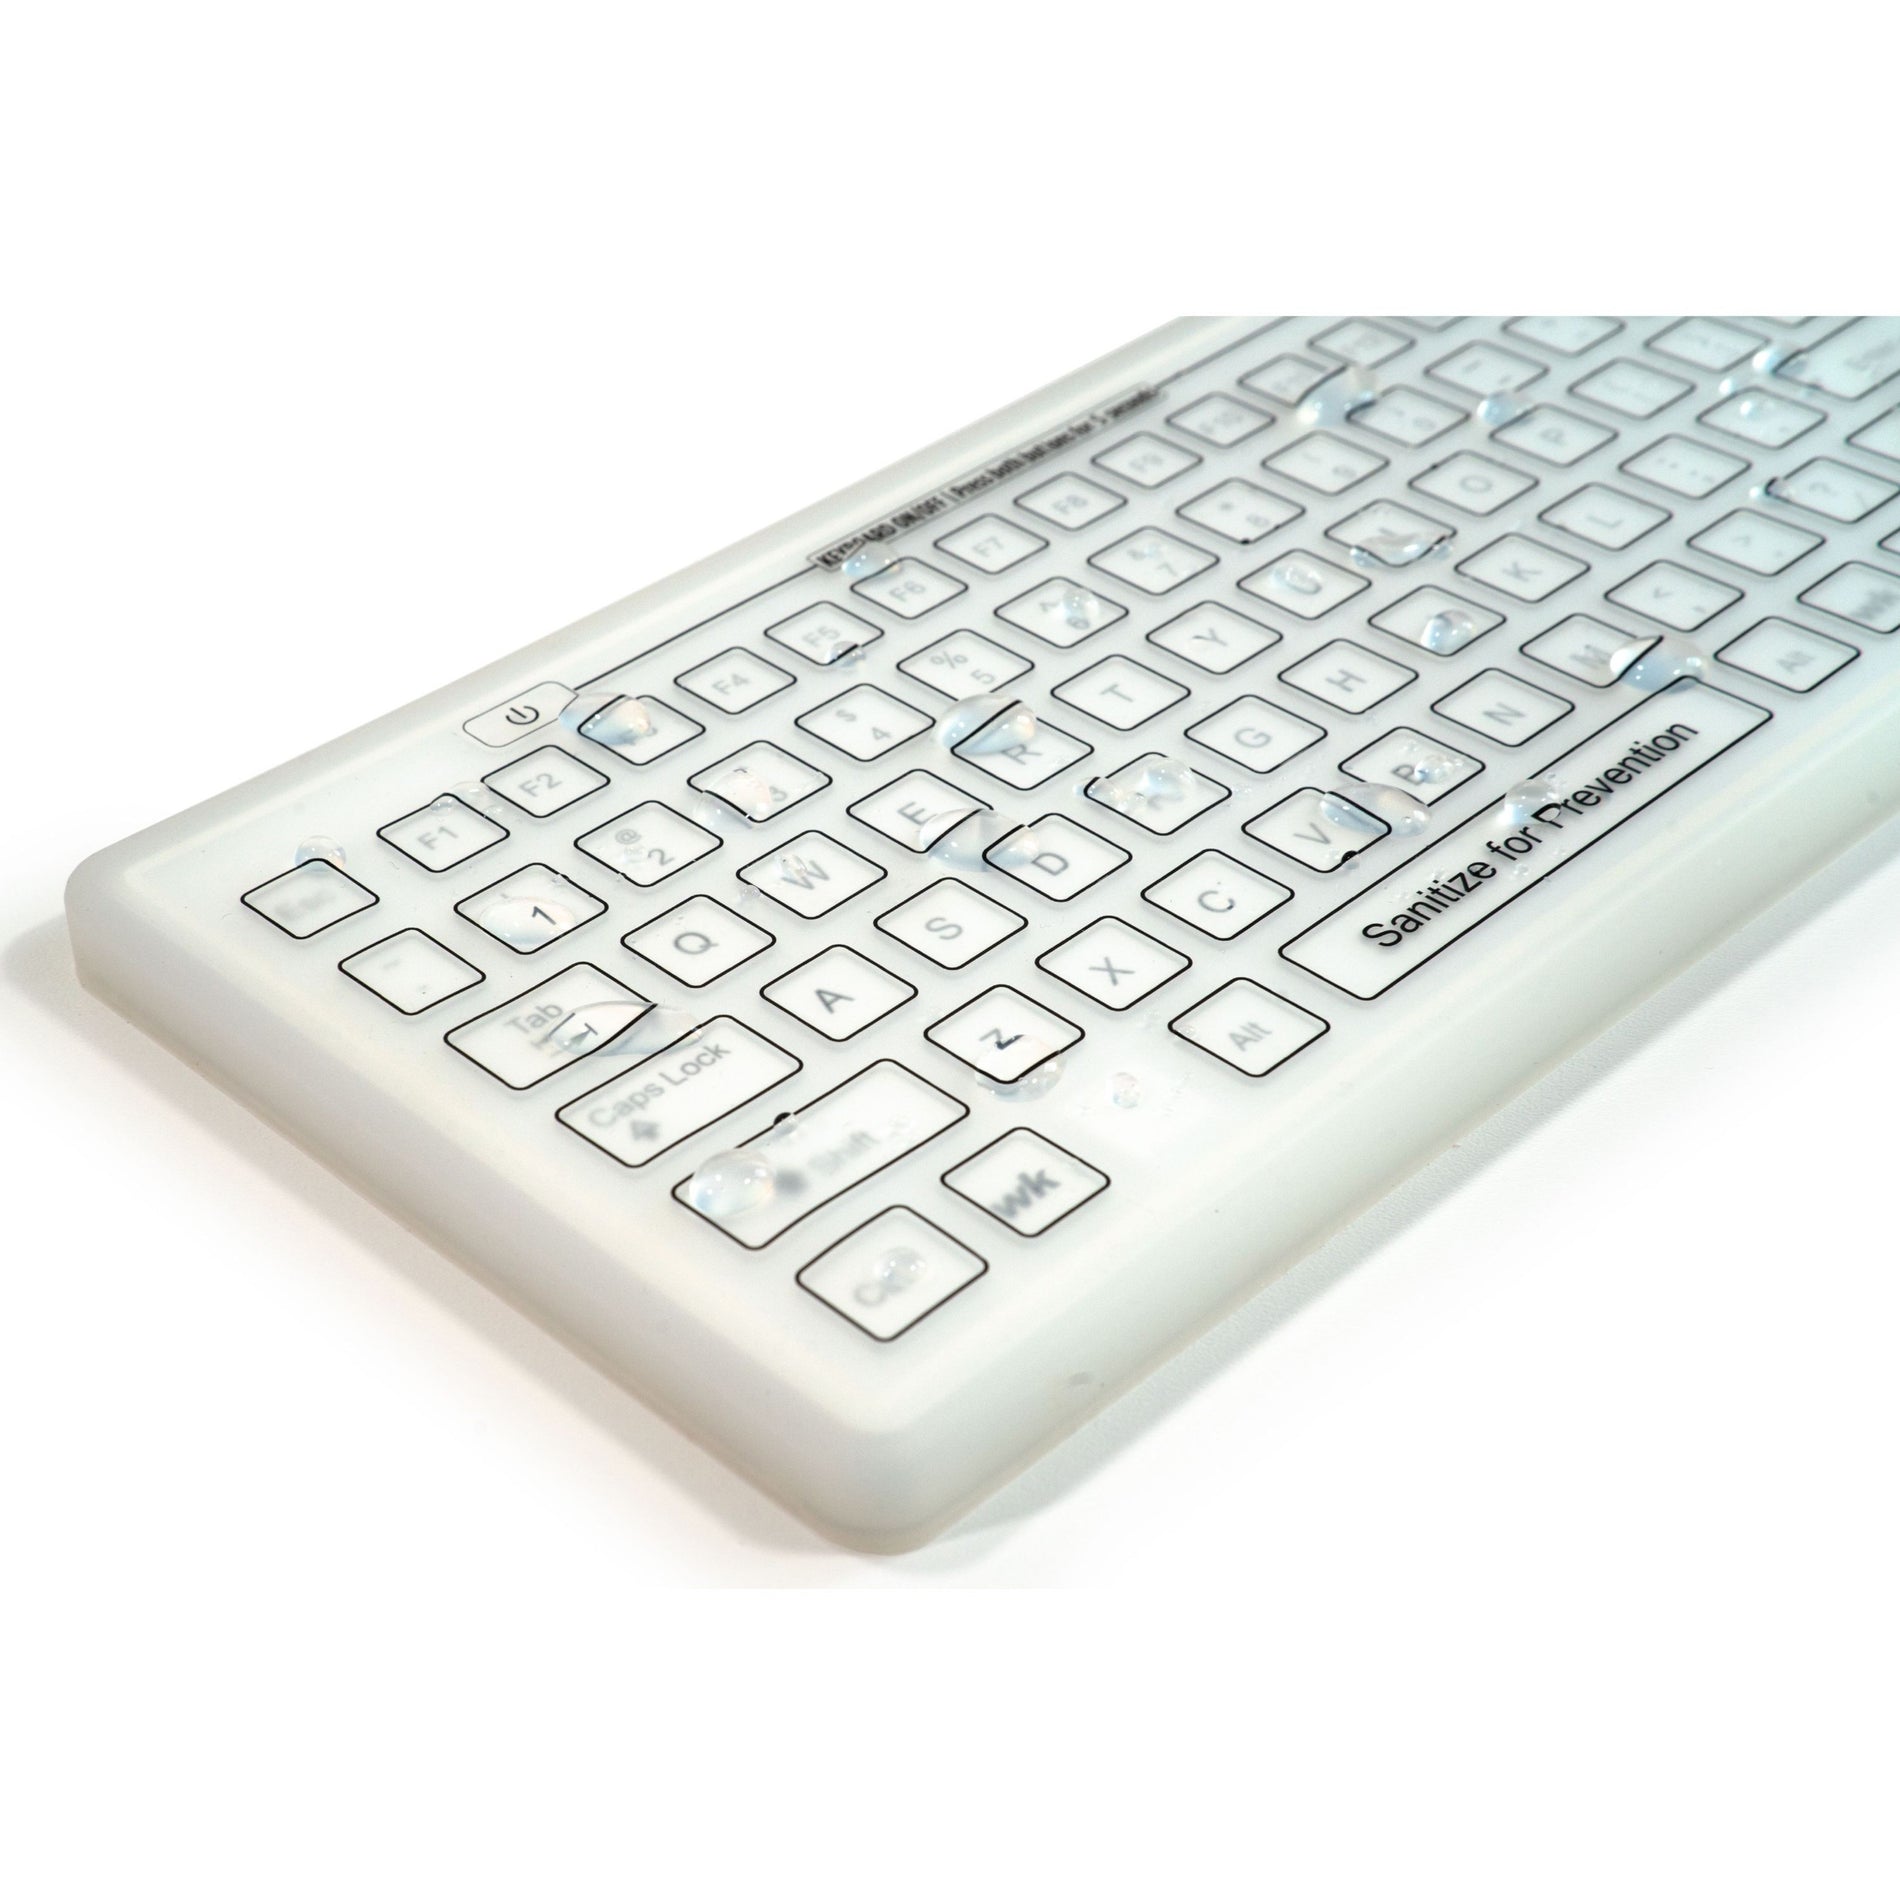 SaniType KBSTRC106SC-W "Swipe Clean" Smooth Surface Washable Keyboard, Hygienic and Sanitary Typing